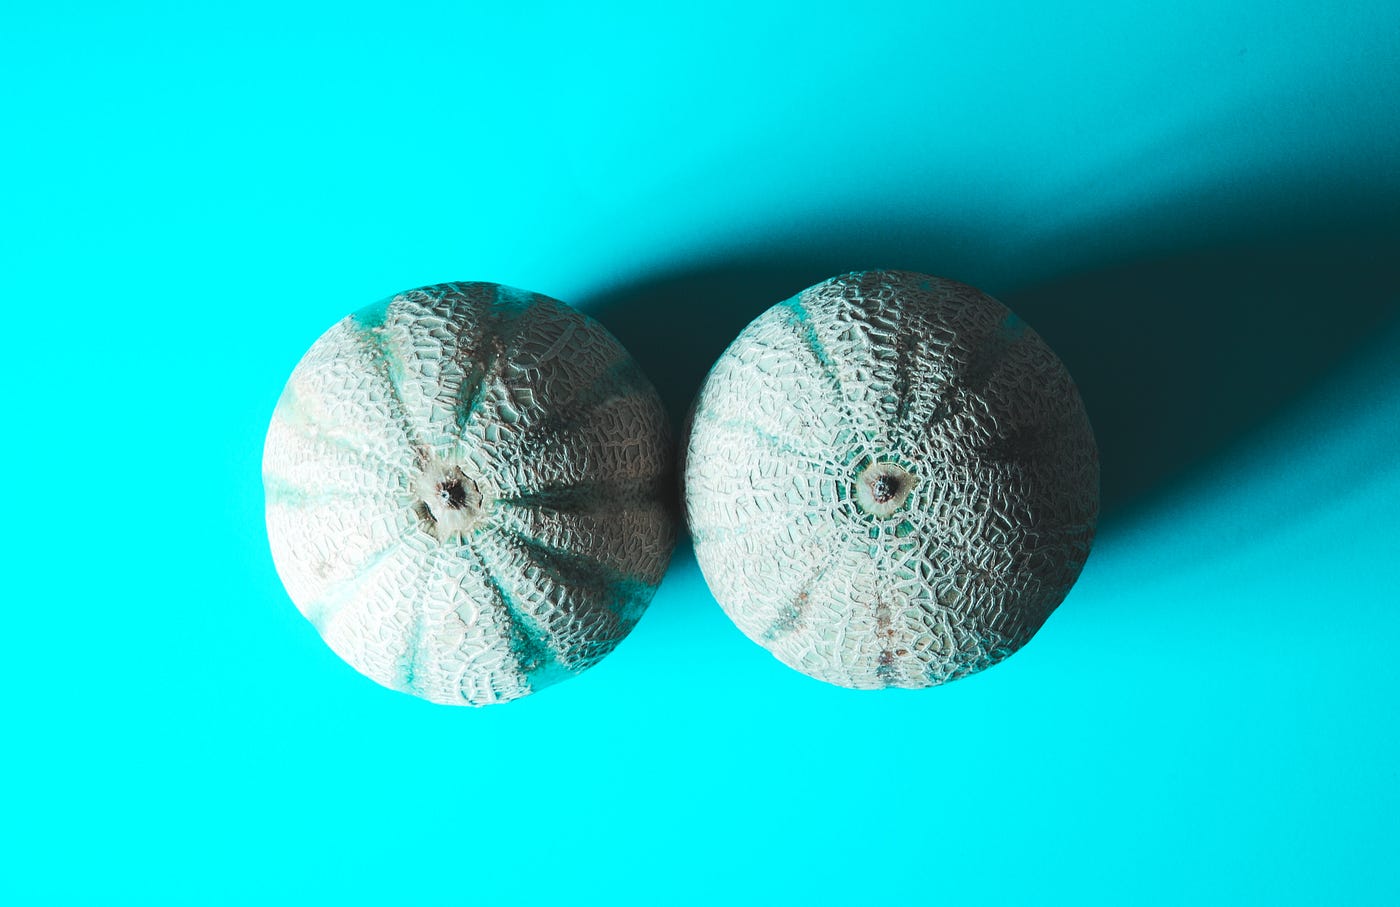 A picture of two melons.